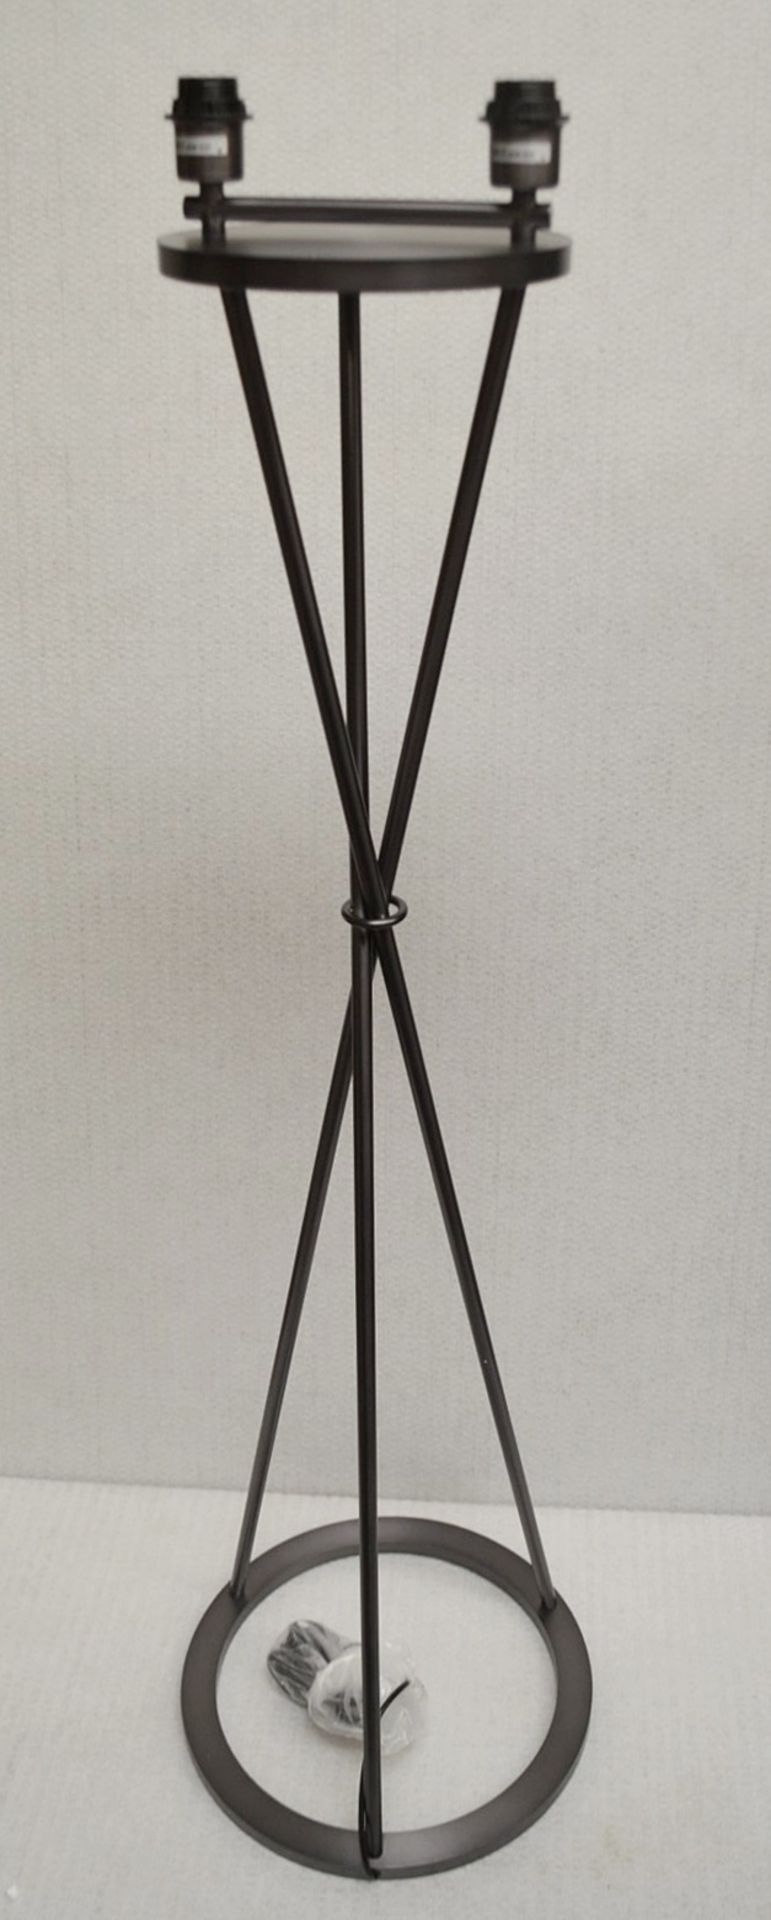 1 x CHELSOM Freestanding Floor Lamp With 2 x Light Sources In A Black Bronze Finish - Unused Boxed